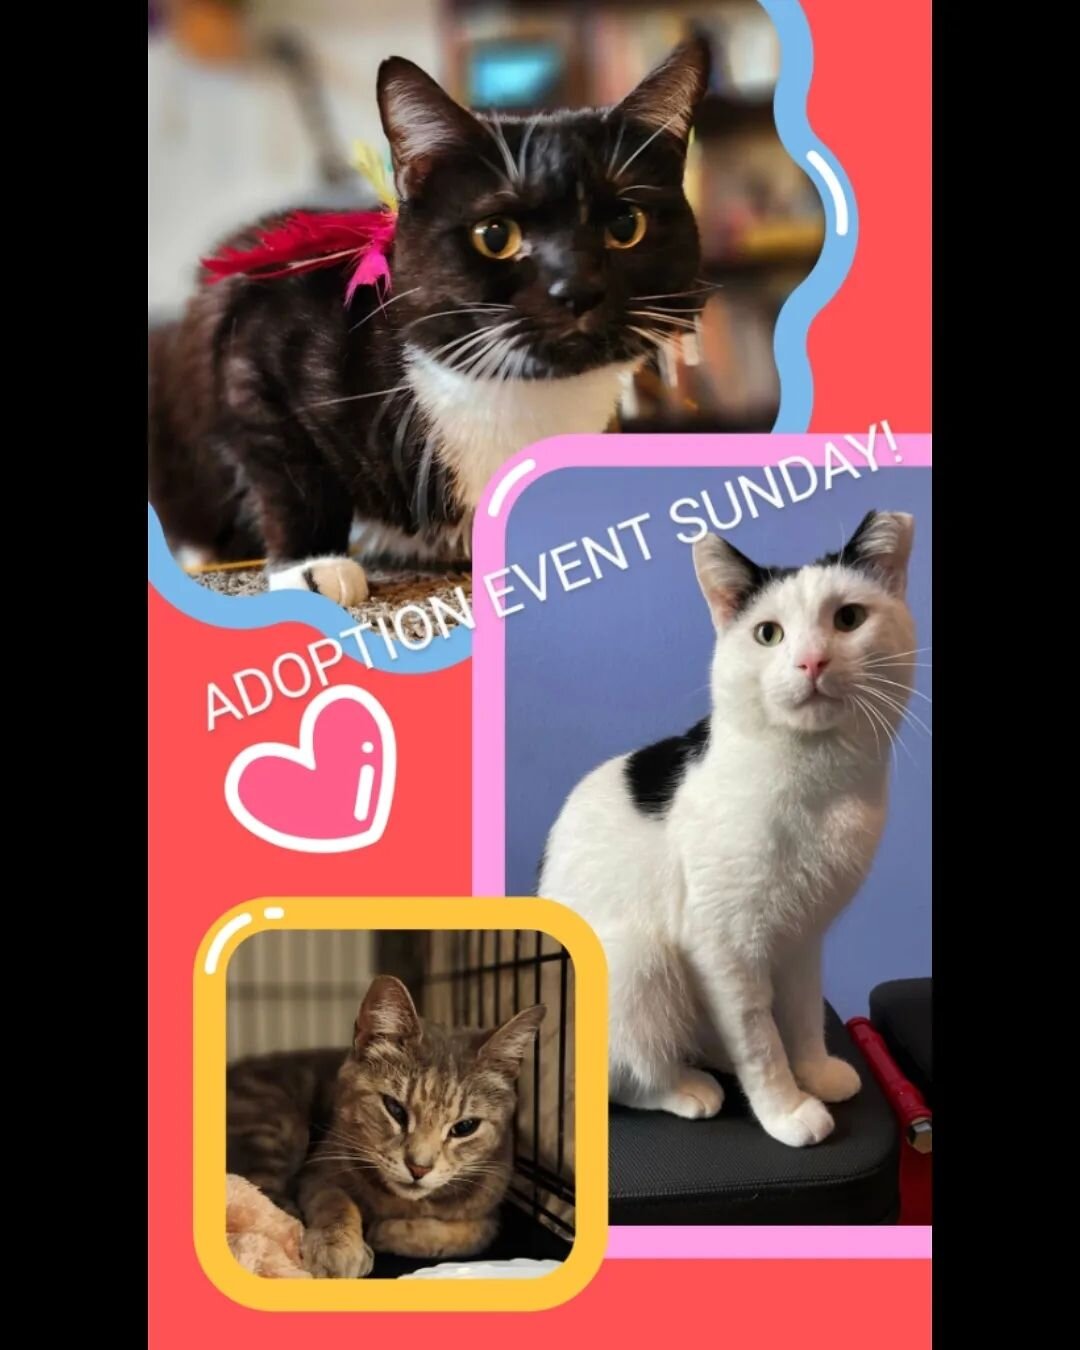 Come meet Joanie, Spin and Charlotte on Sunday at @oceanhillcats's adoption event! 46 Rockaway Ave from 12-3!